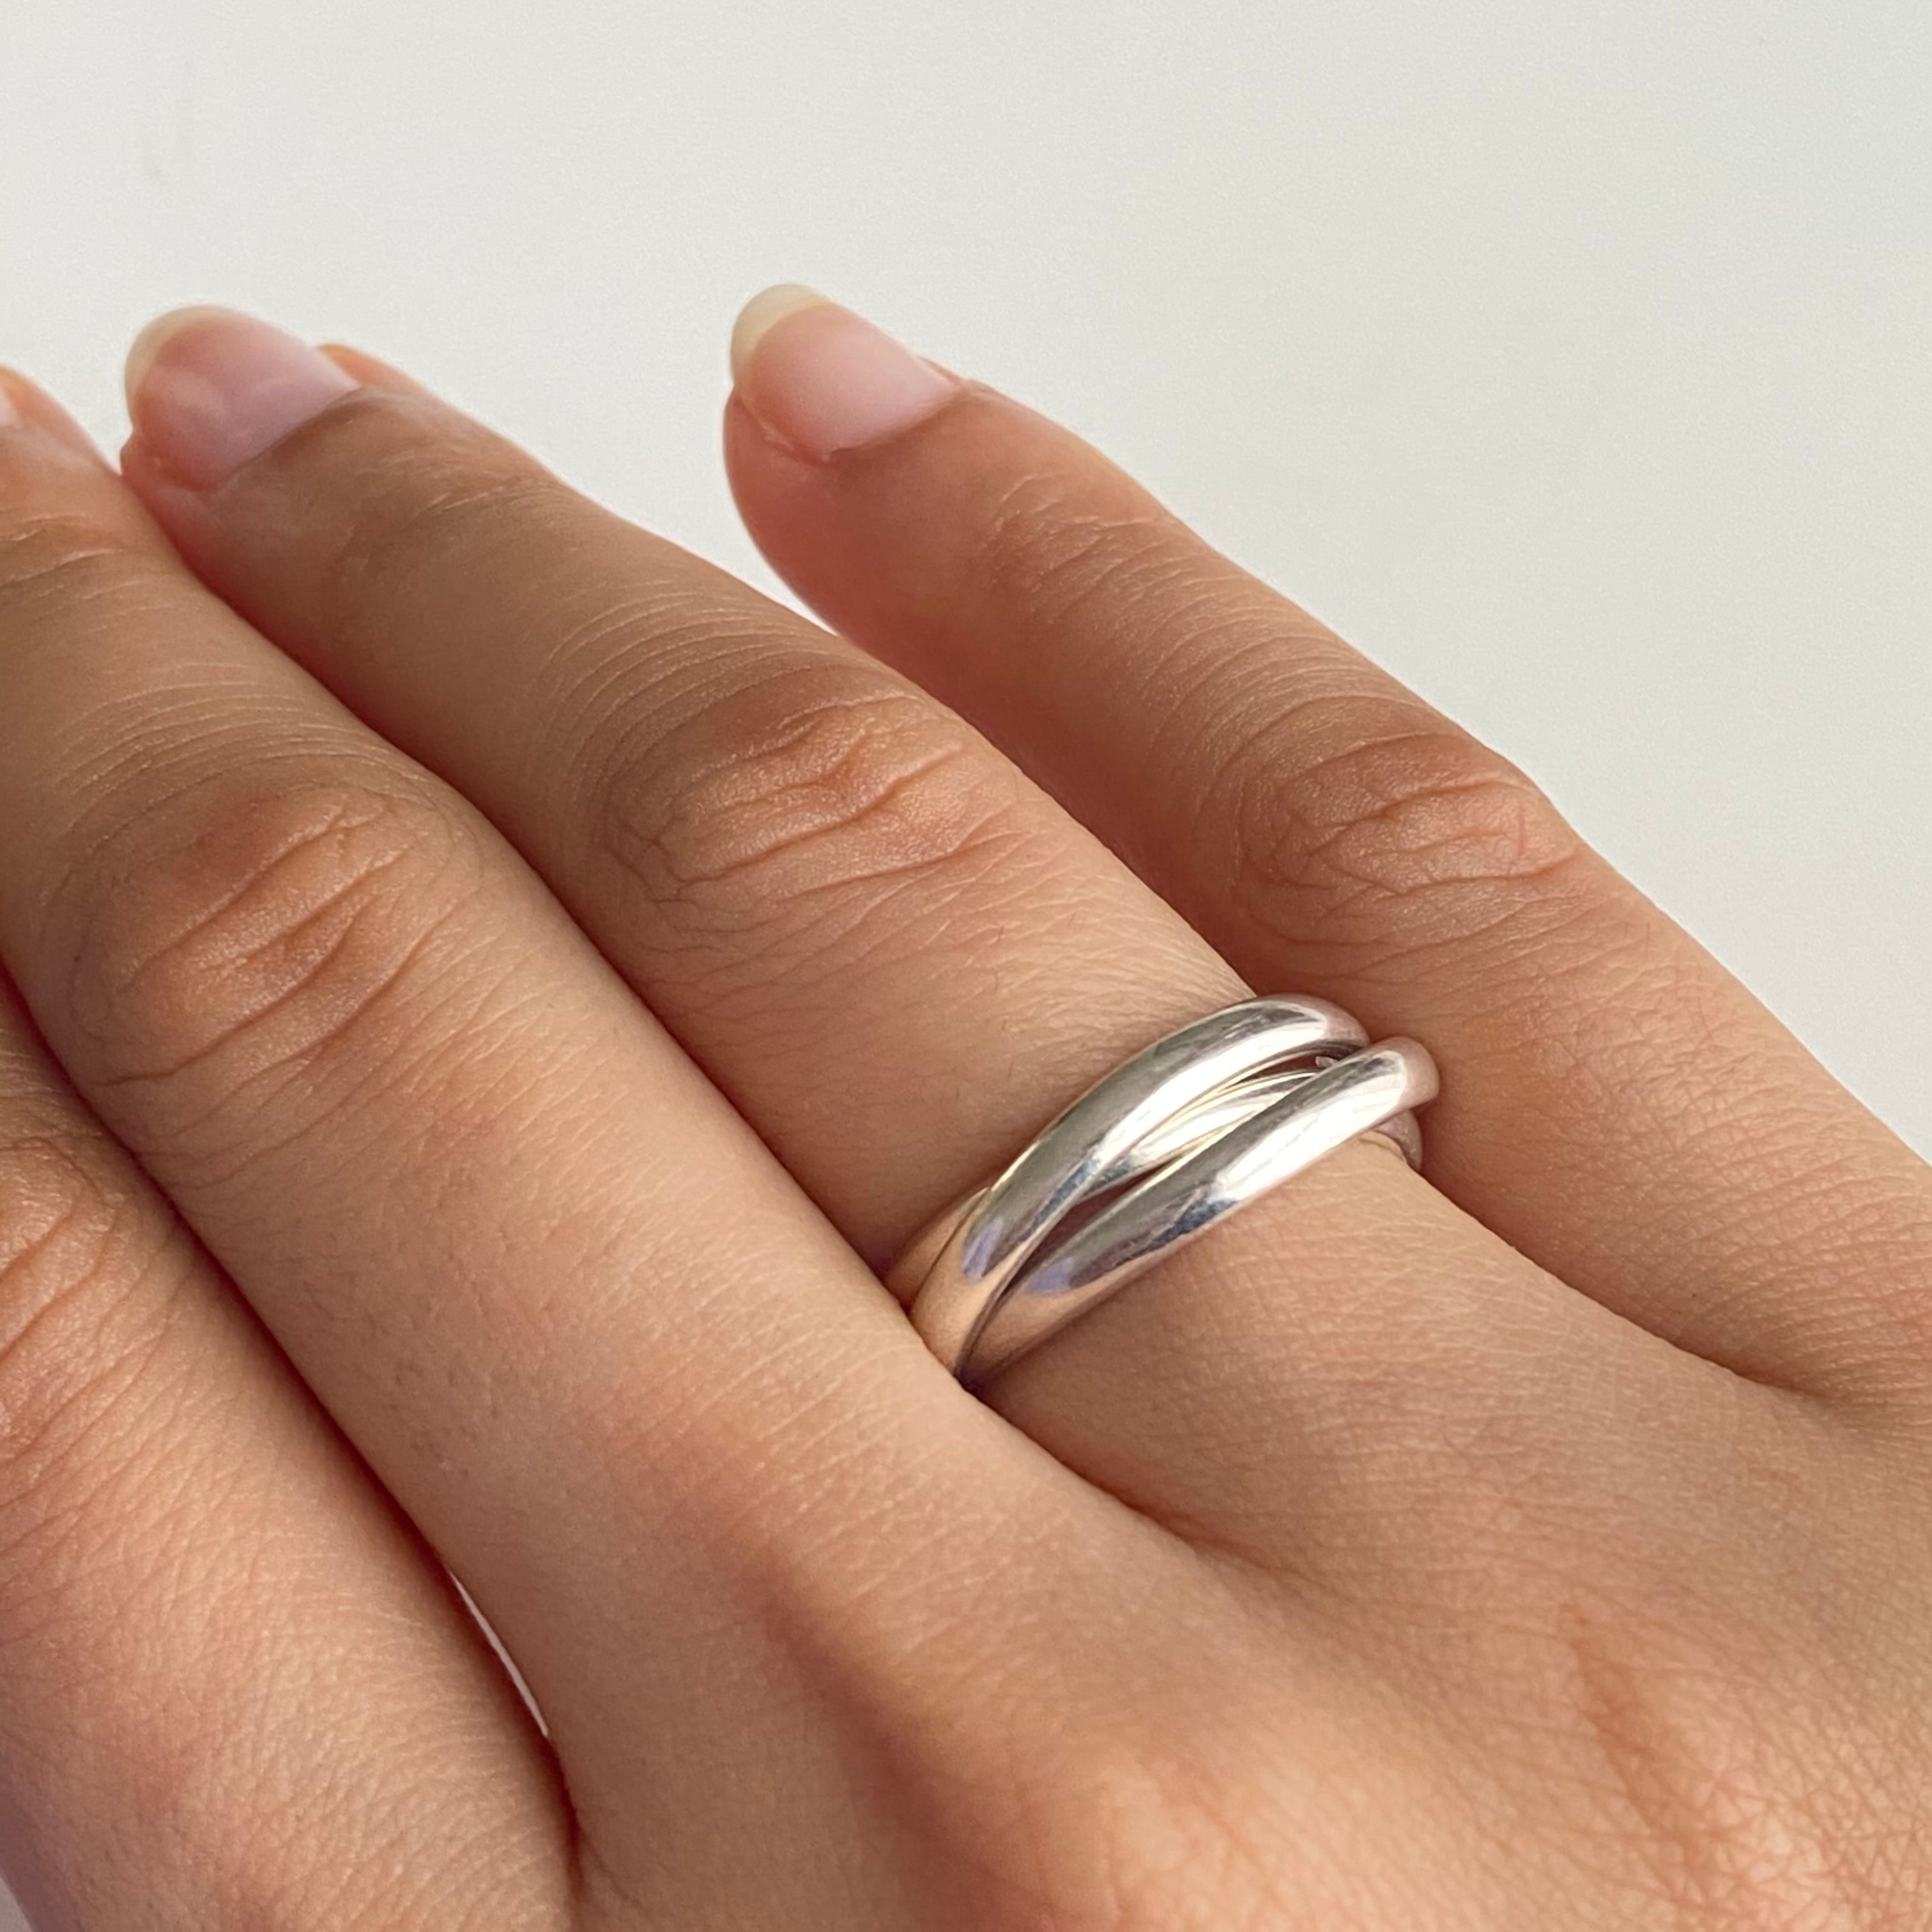 Intertwined Sterling Silver Ring - 3 Bands